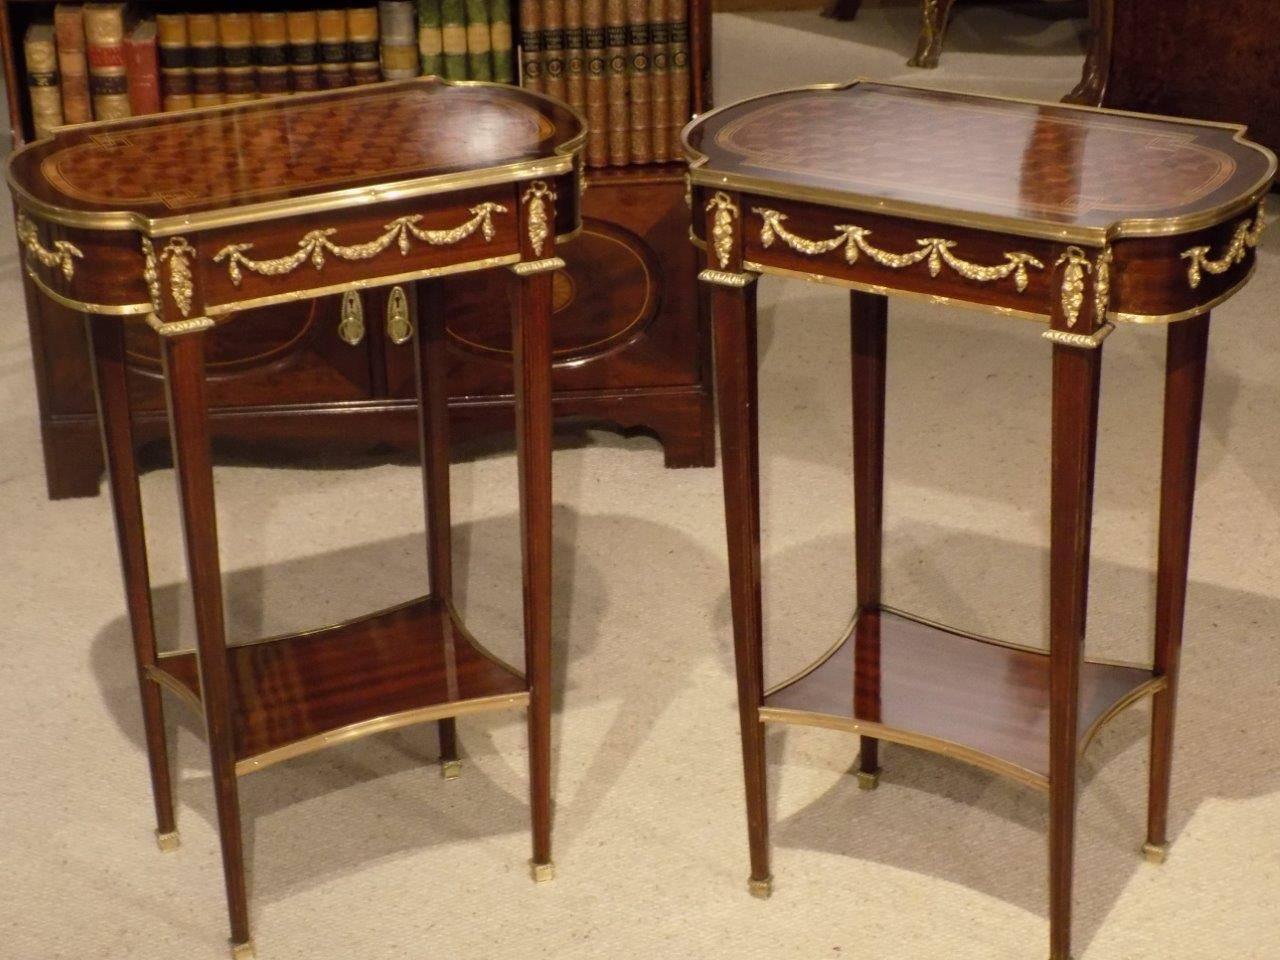 Late 19th Century Pair of French Mahogany, Kingwood and Parquetry Inlaid Side Tables